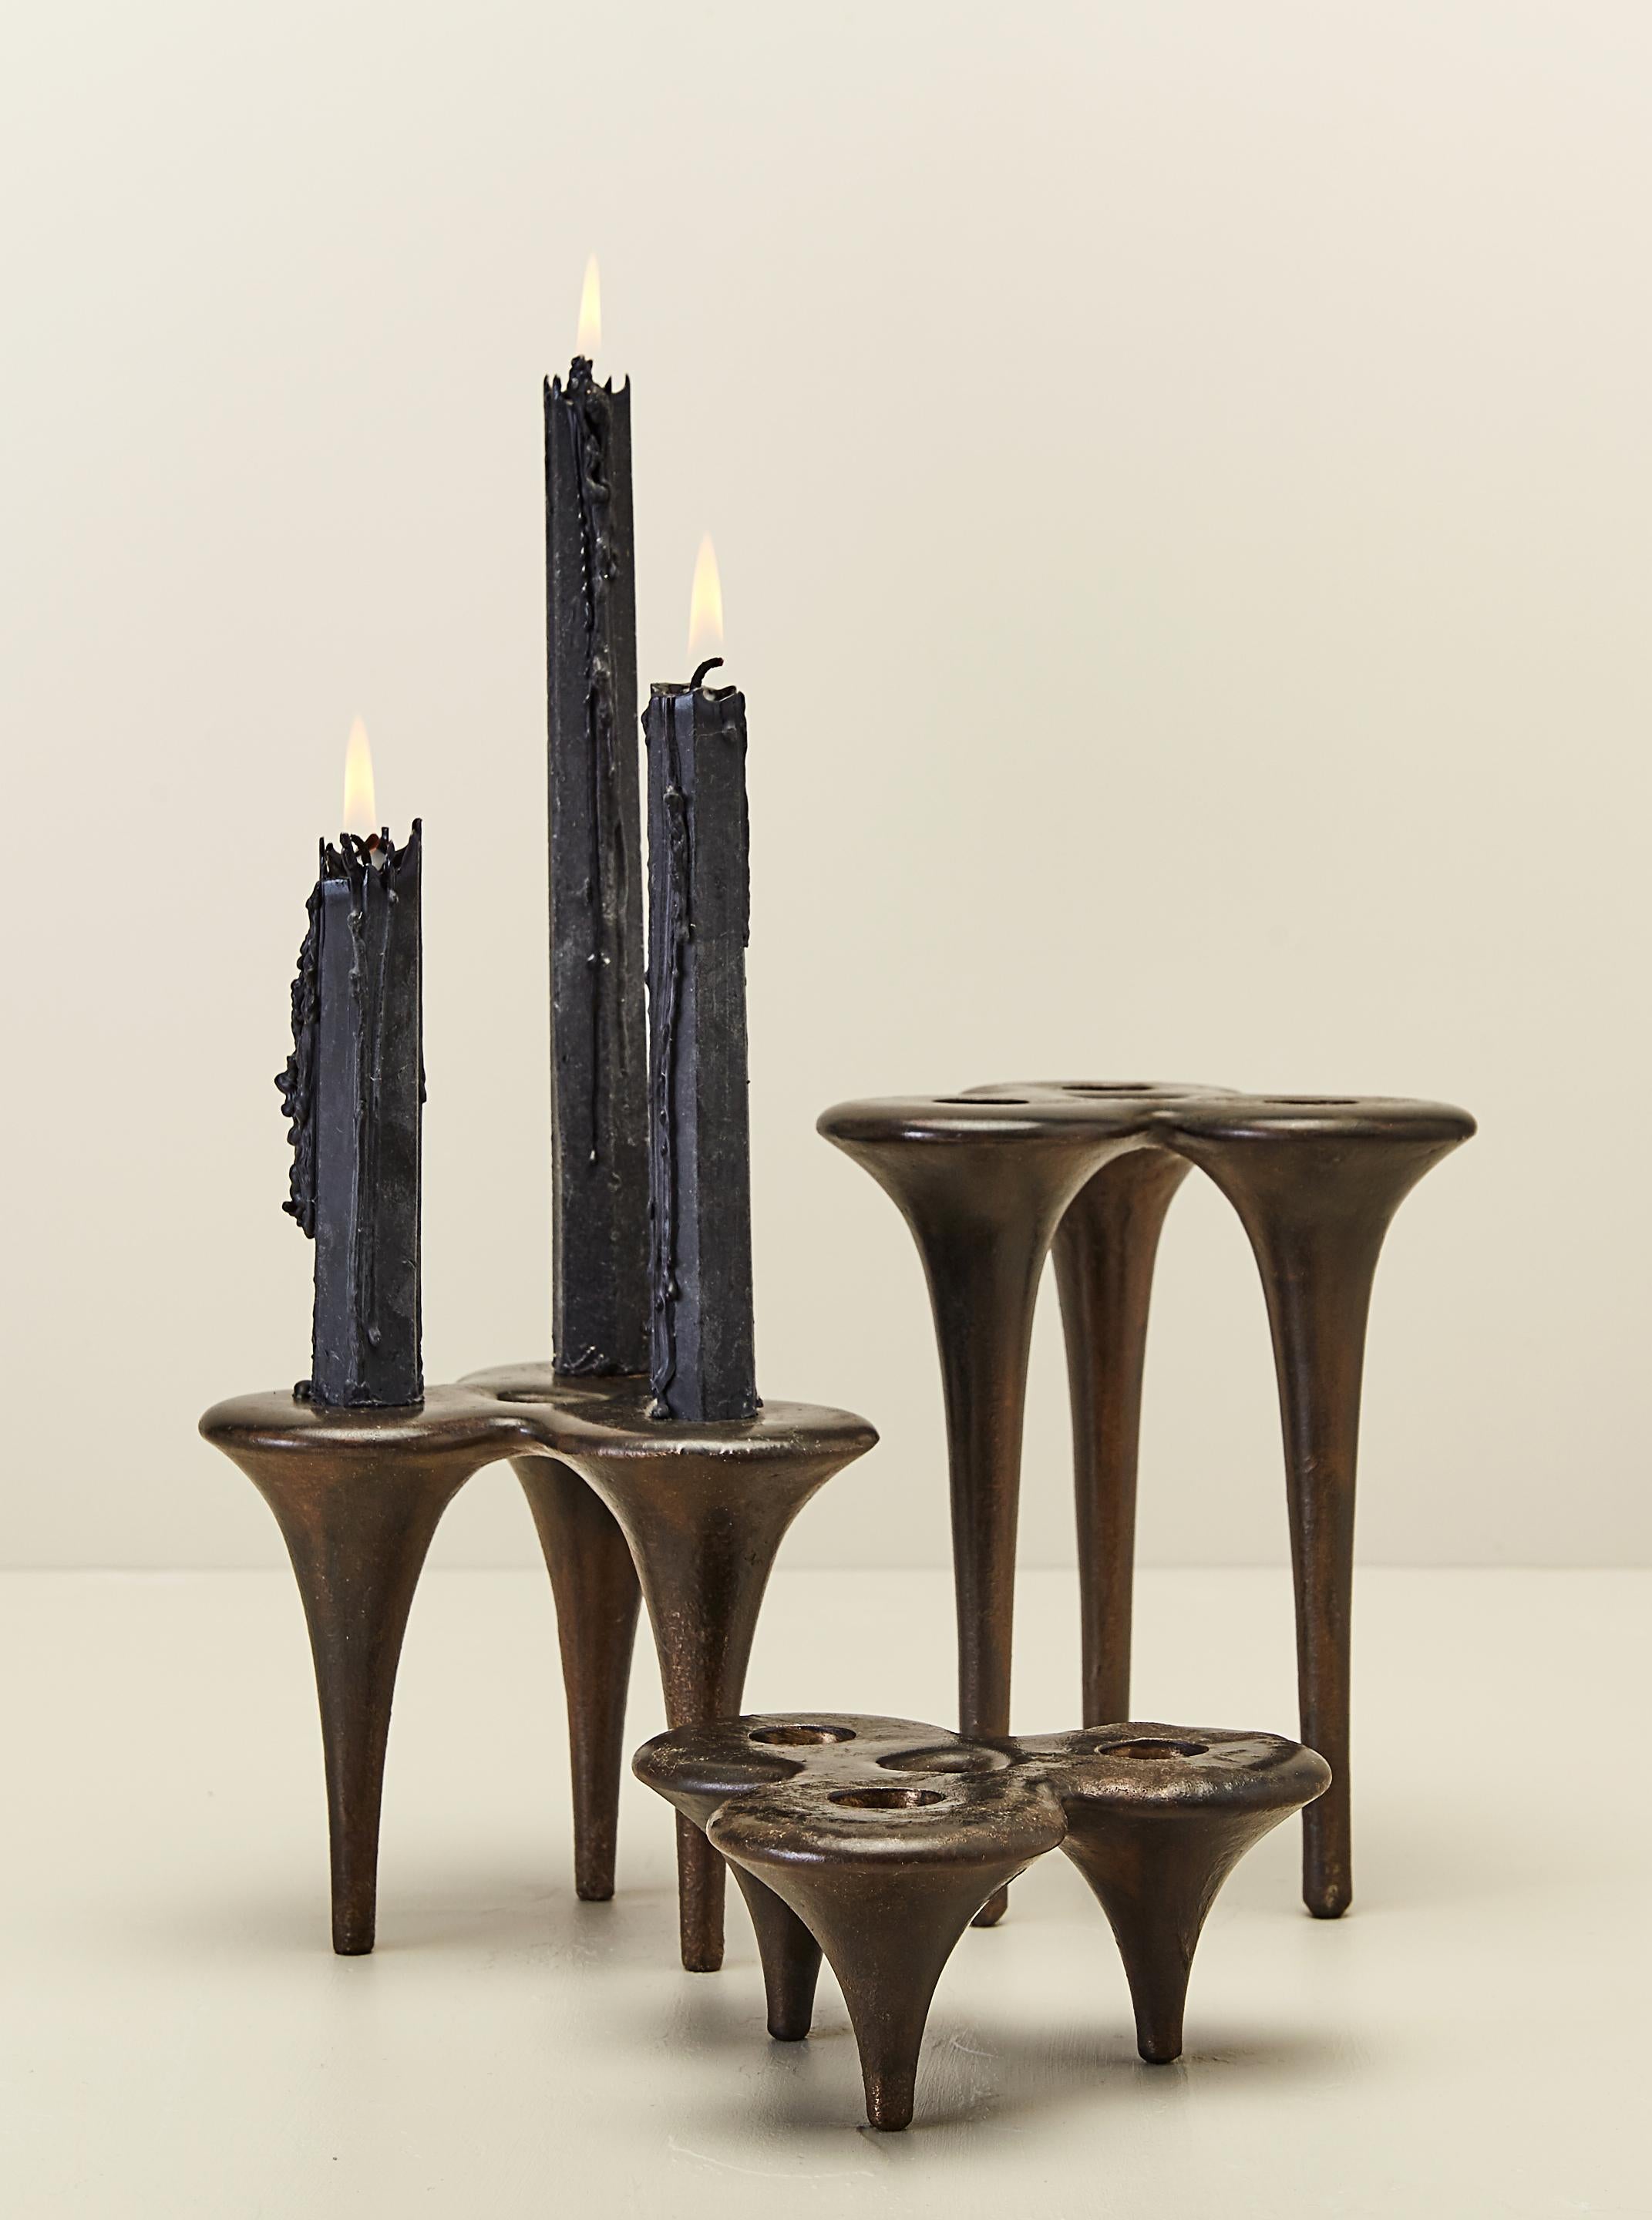 These elegant and sexy candlesticks were sculpted in wax then sand cast in solid bronze. They taper like a Manolo stiletto but finished with a rustic patina that brings them down to earth. Handmade by artist and designer Daniel Oates in small